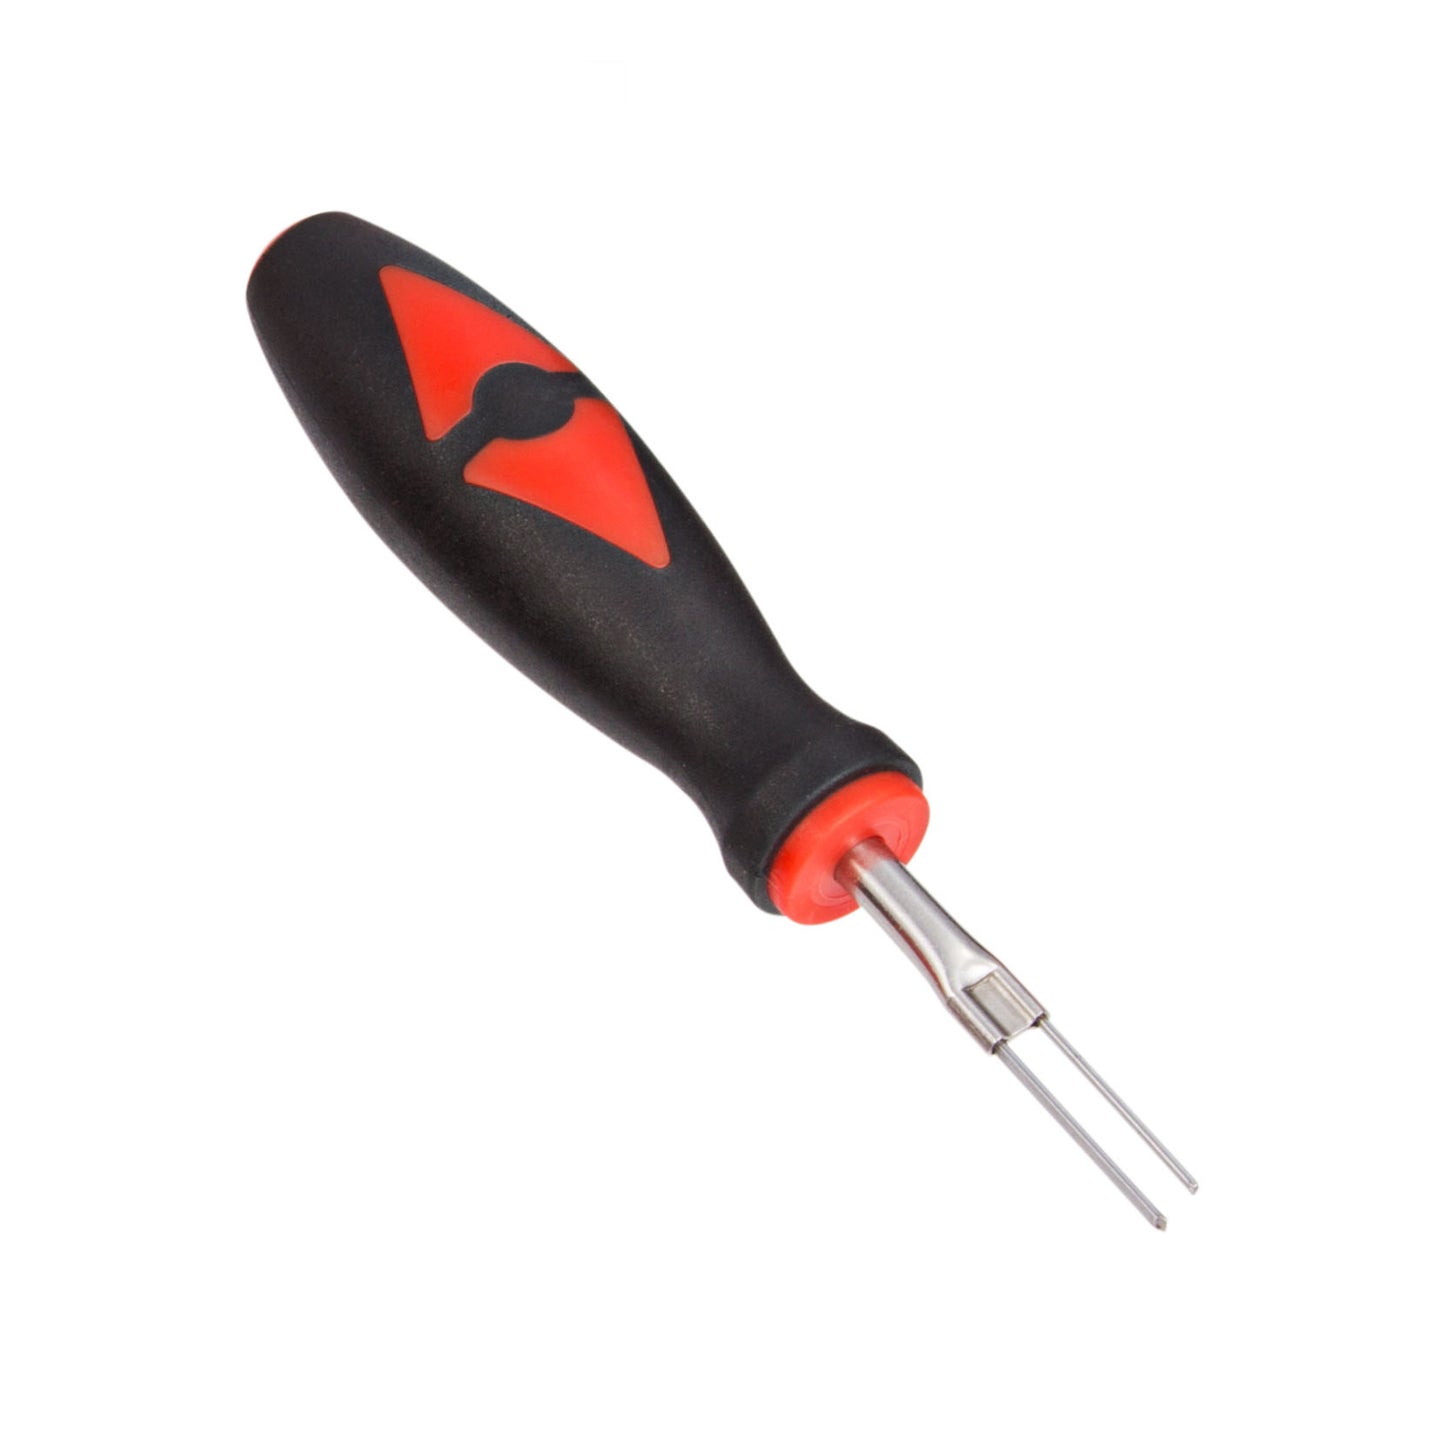 STEELMAN 1.60mm x 24.00mm Flat Twin Blade Automotive Terminal Tool designed to separate wires from their terminal blocks without causing damage to either